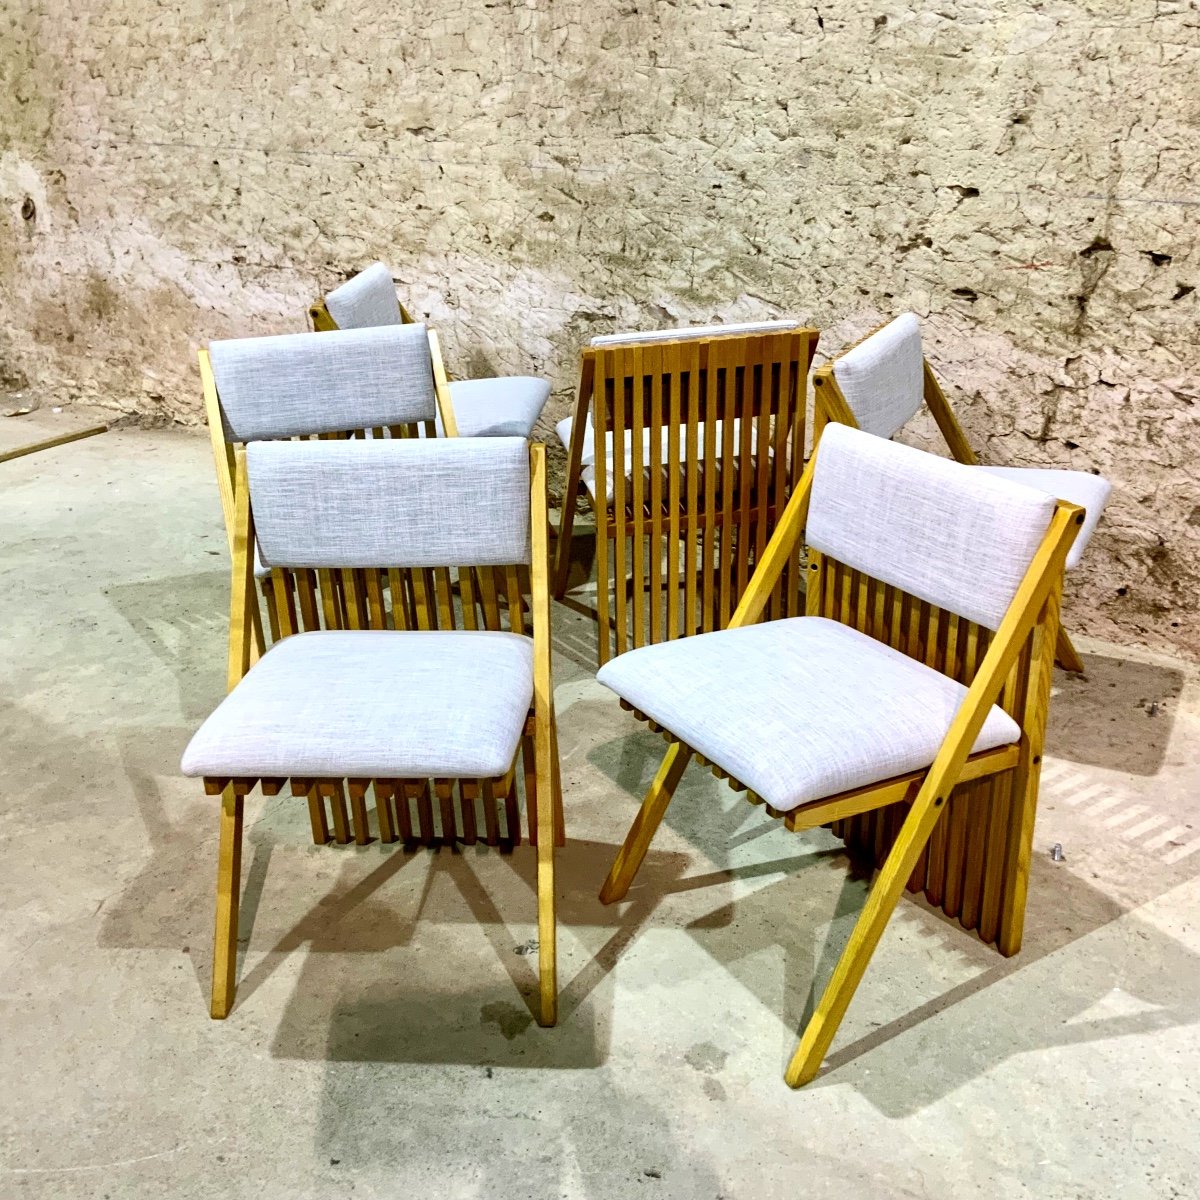 6 Solid Wood Chairs By Tito Pinori, Millepiedi Model, Italy 1970s-photo-2